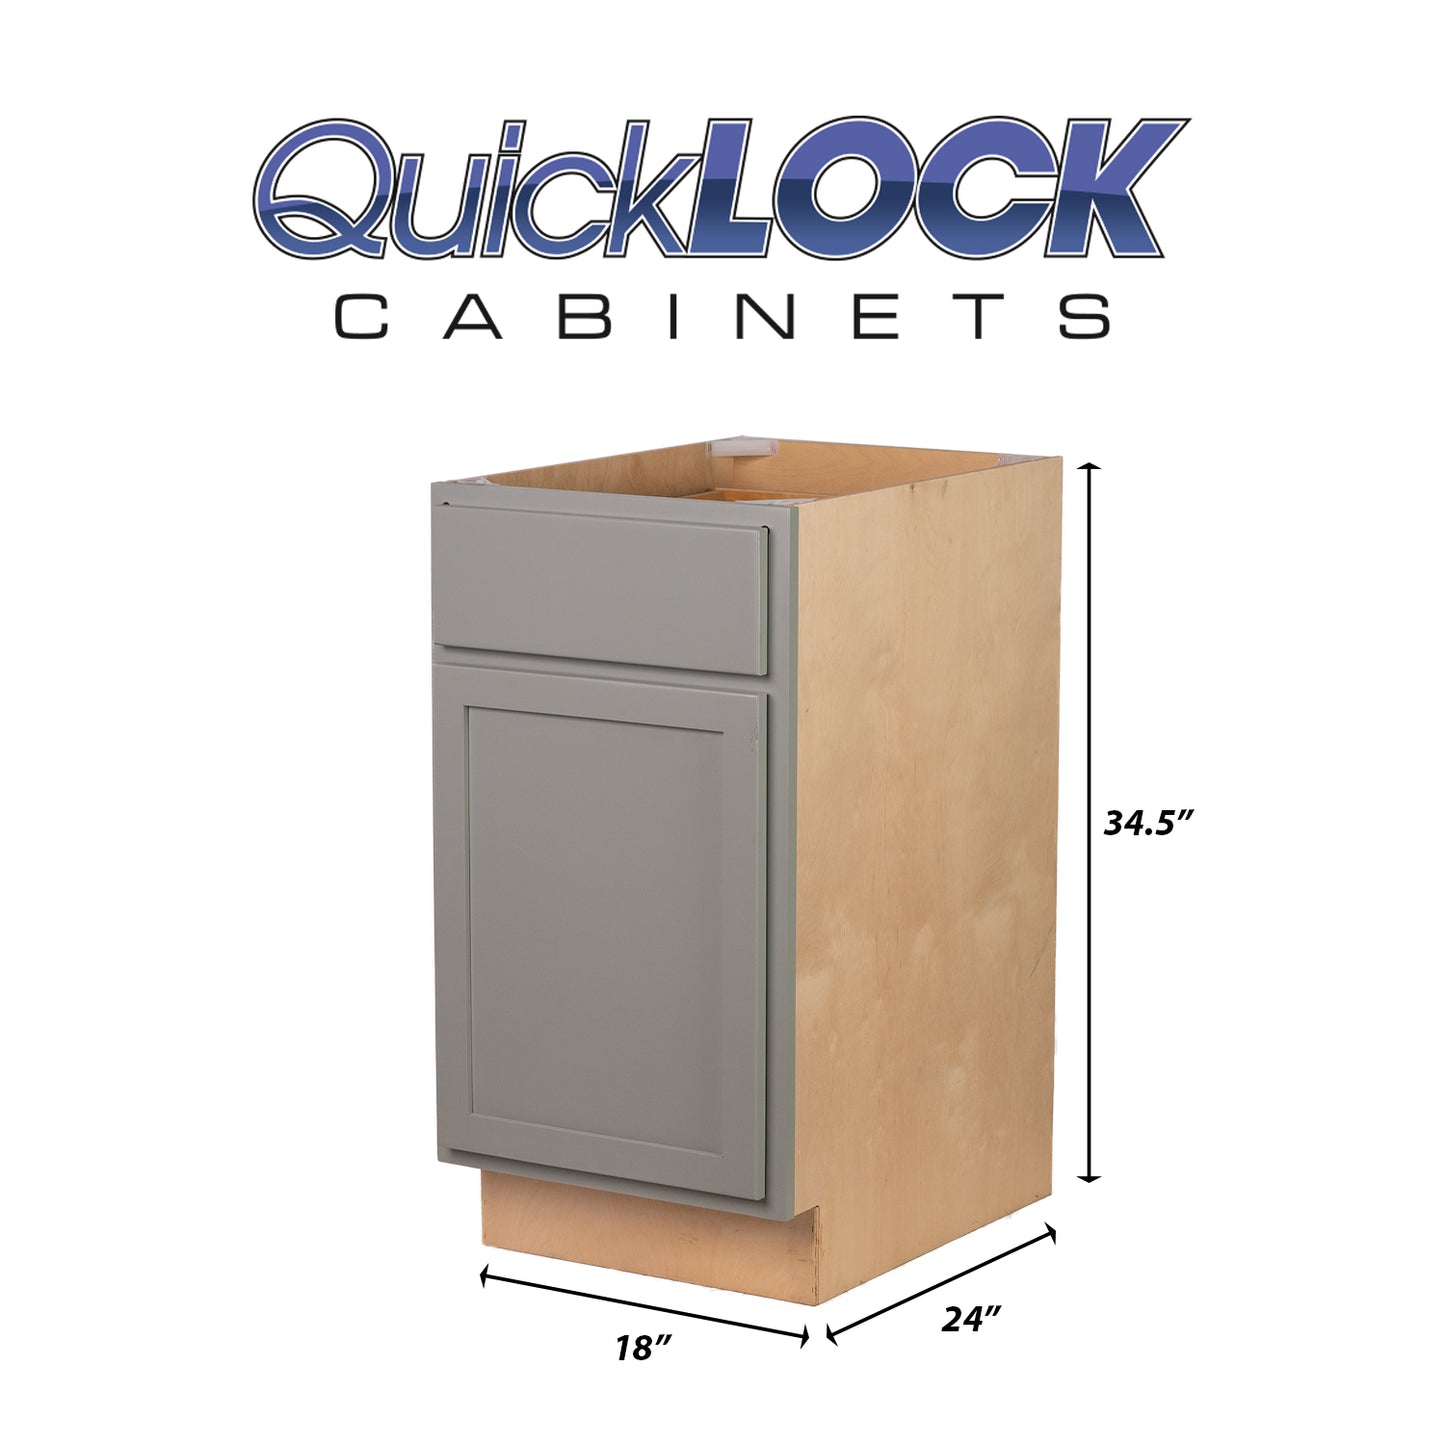 Quicklock RTA (Ready-to-Assemble) Magnetic Grey Base Cabinet | 18"Wx34.5"Hx24"D